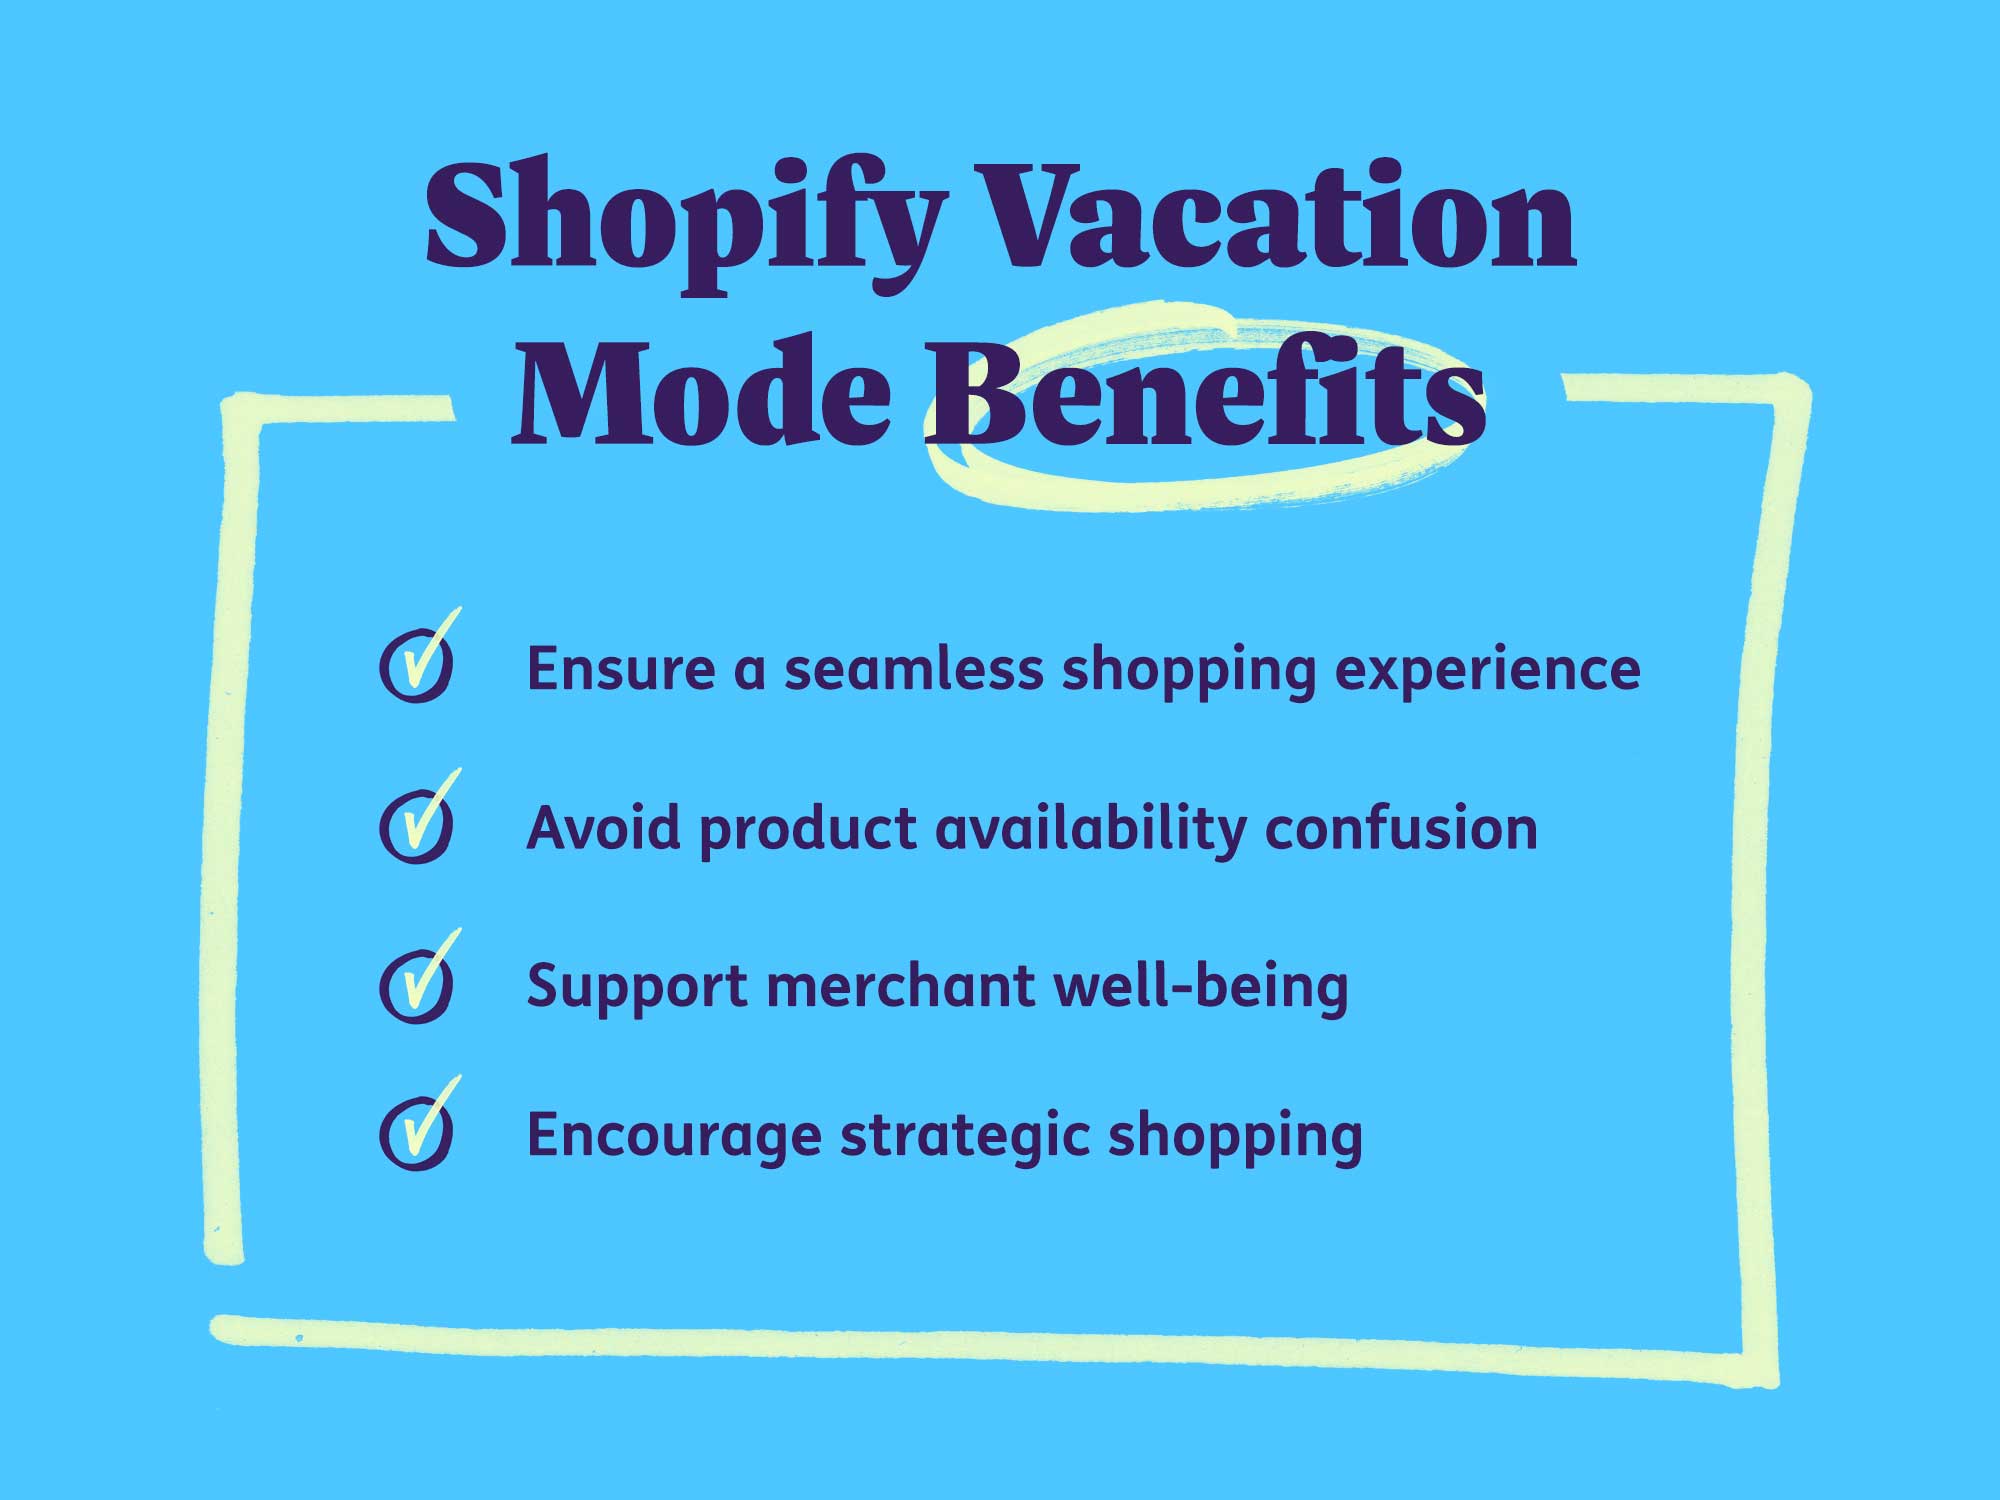 Shopify Vacation Mode Benefits: Ensure a seamless shopping experience, avoid product availability confusion, support merchant well-being, and encourage strategic shopping